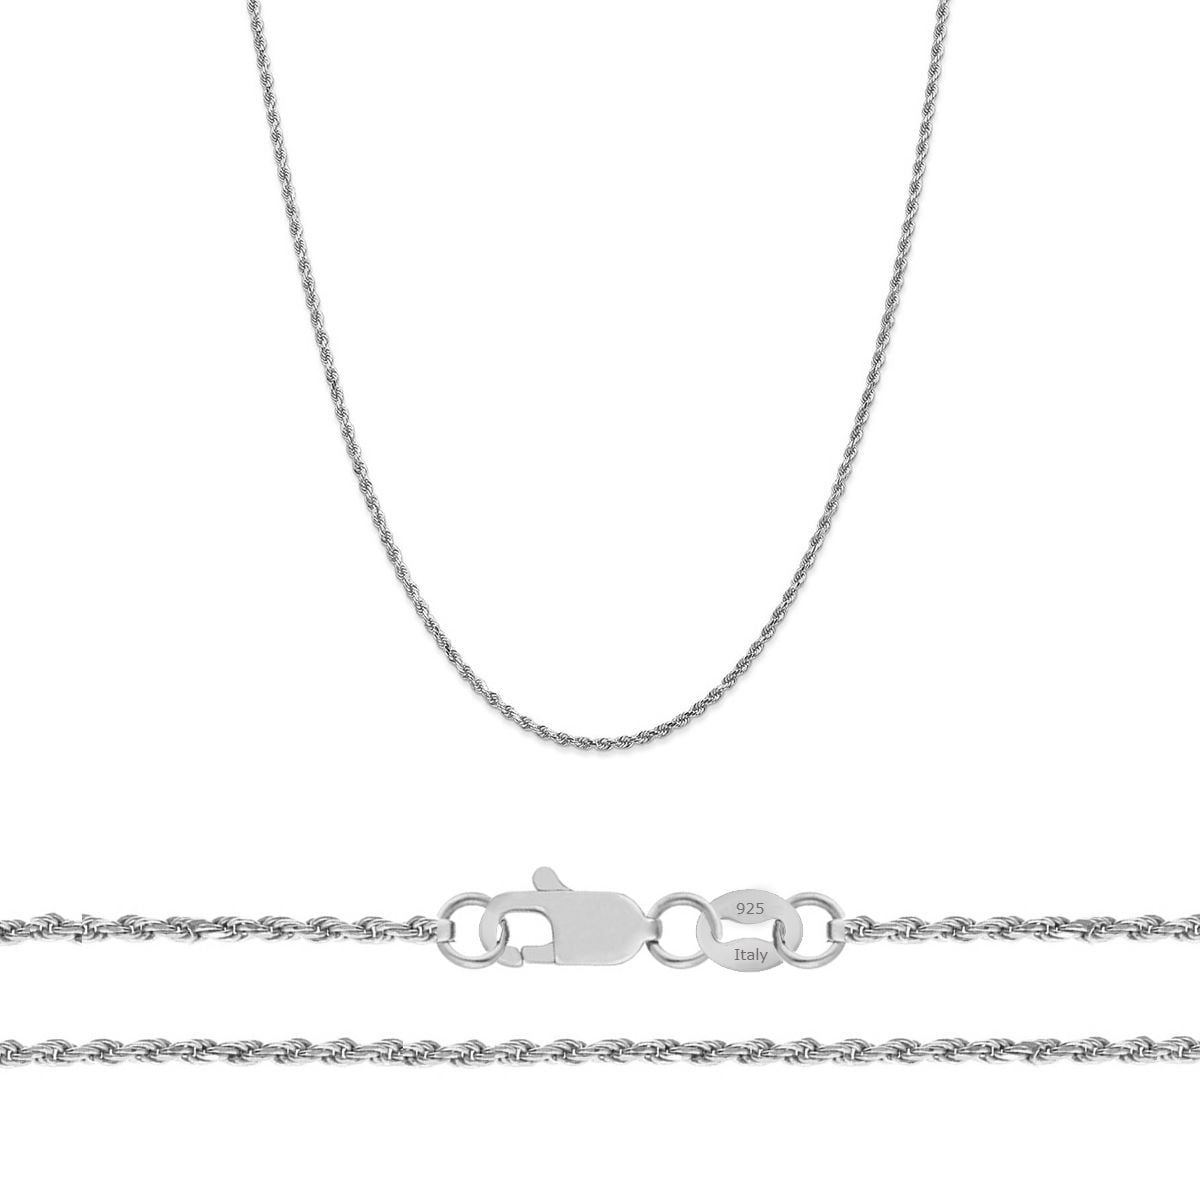 1.4mm 925 Sterling Silver O Trace Tubes Necklace BELCHER ROLO Chain 